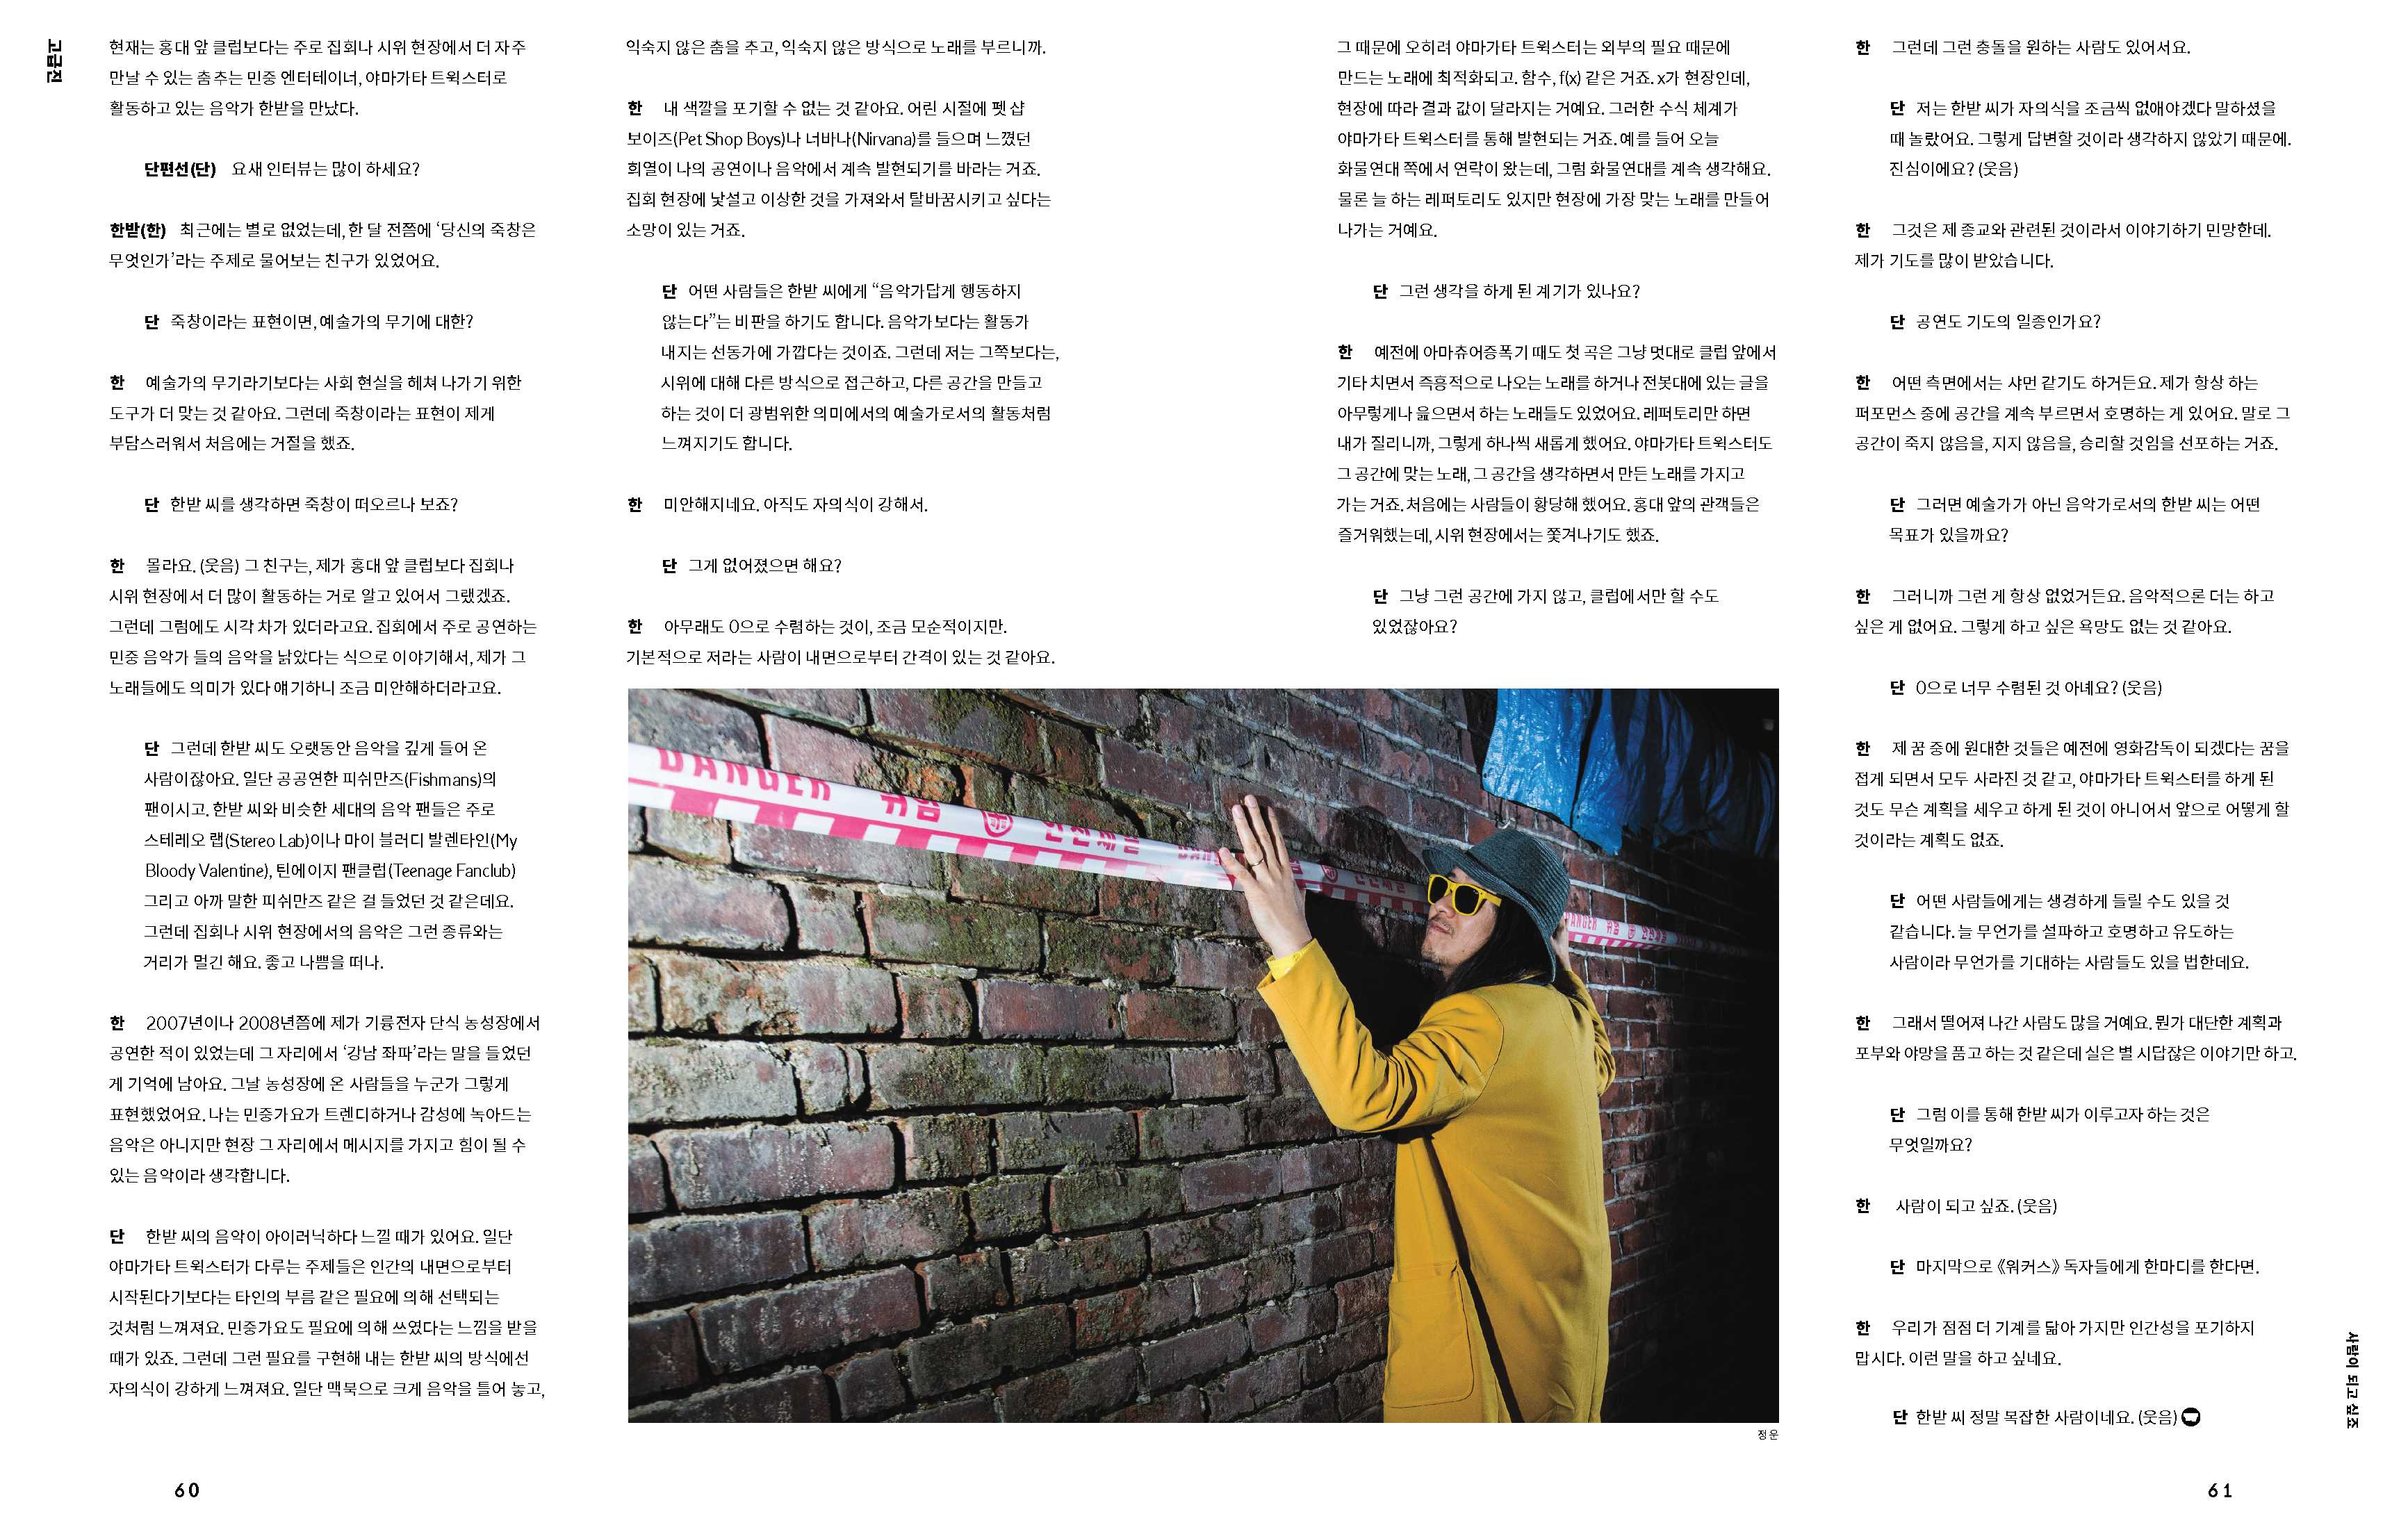 workers_issue_06_spread0415_29